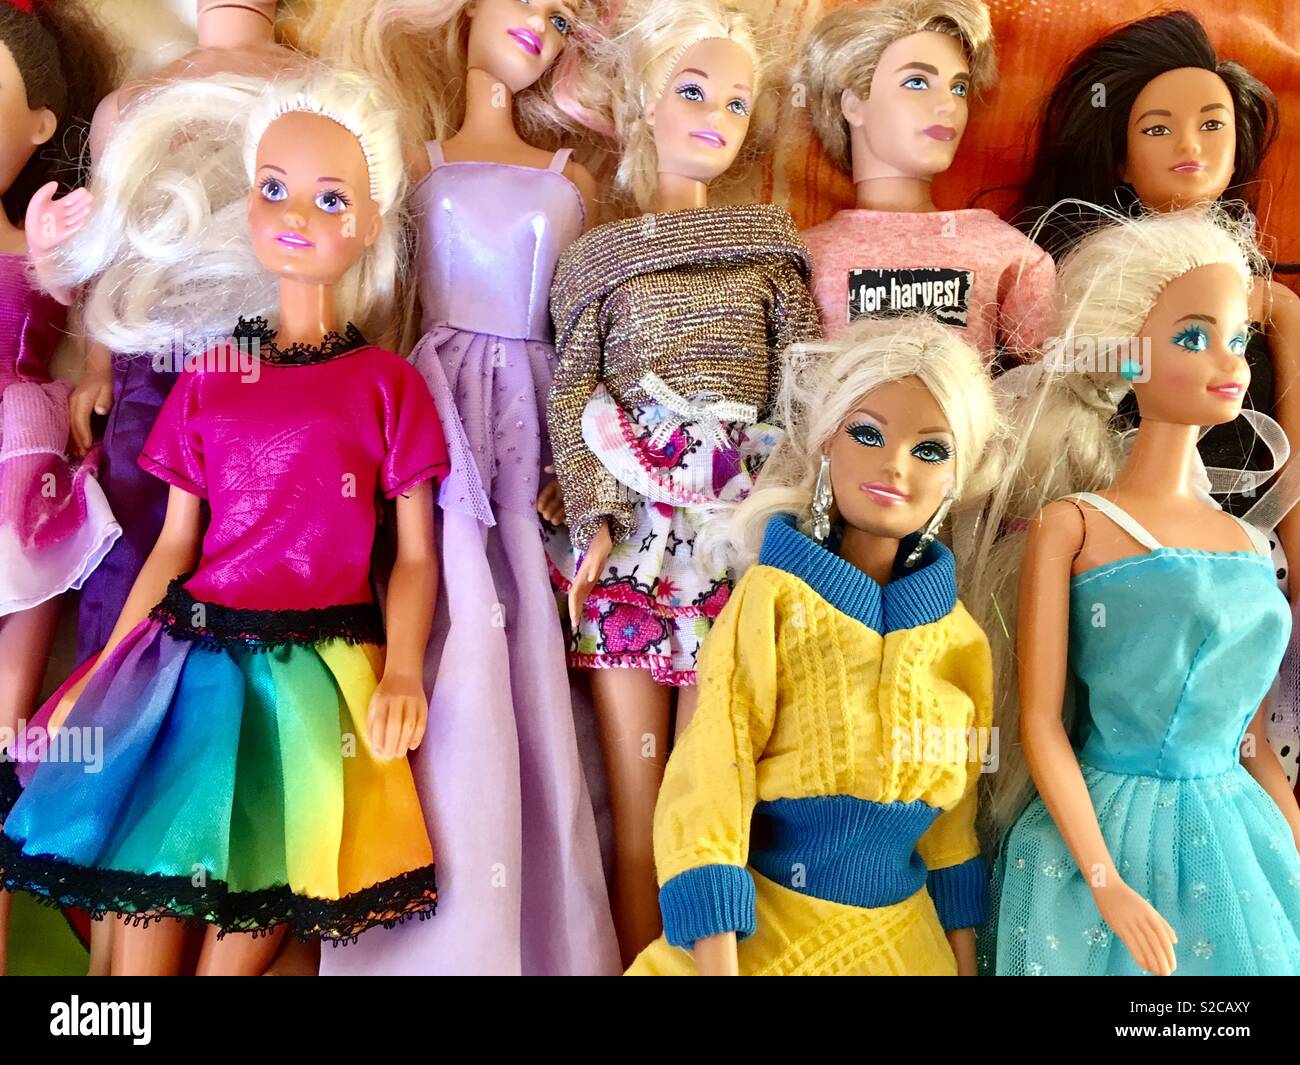 Vintage Barbie High Resolution Stock Photography and Images - Alamy